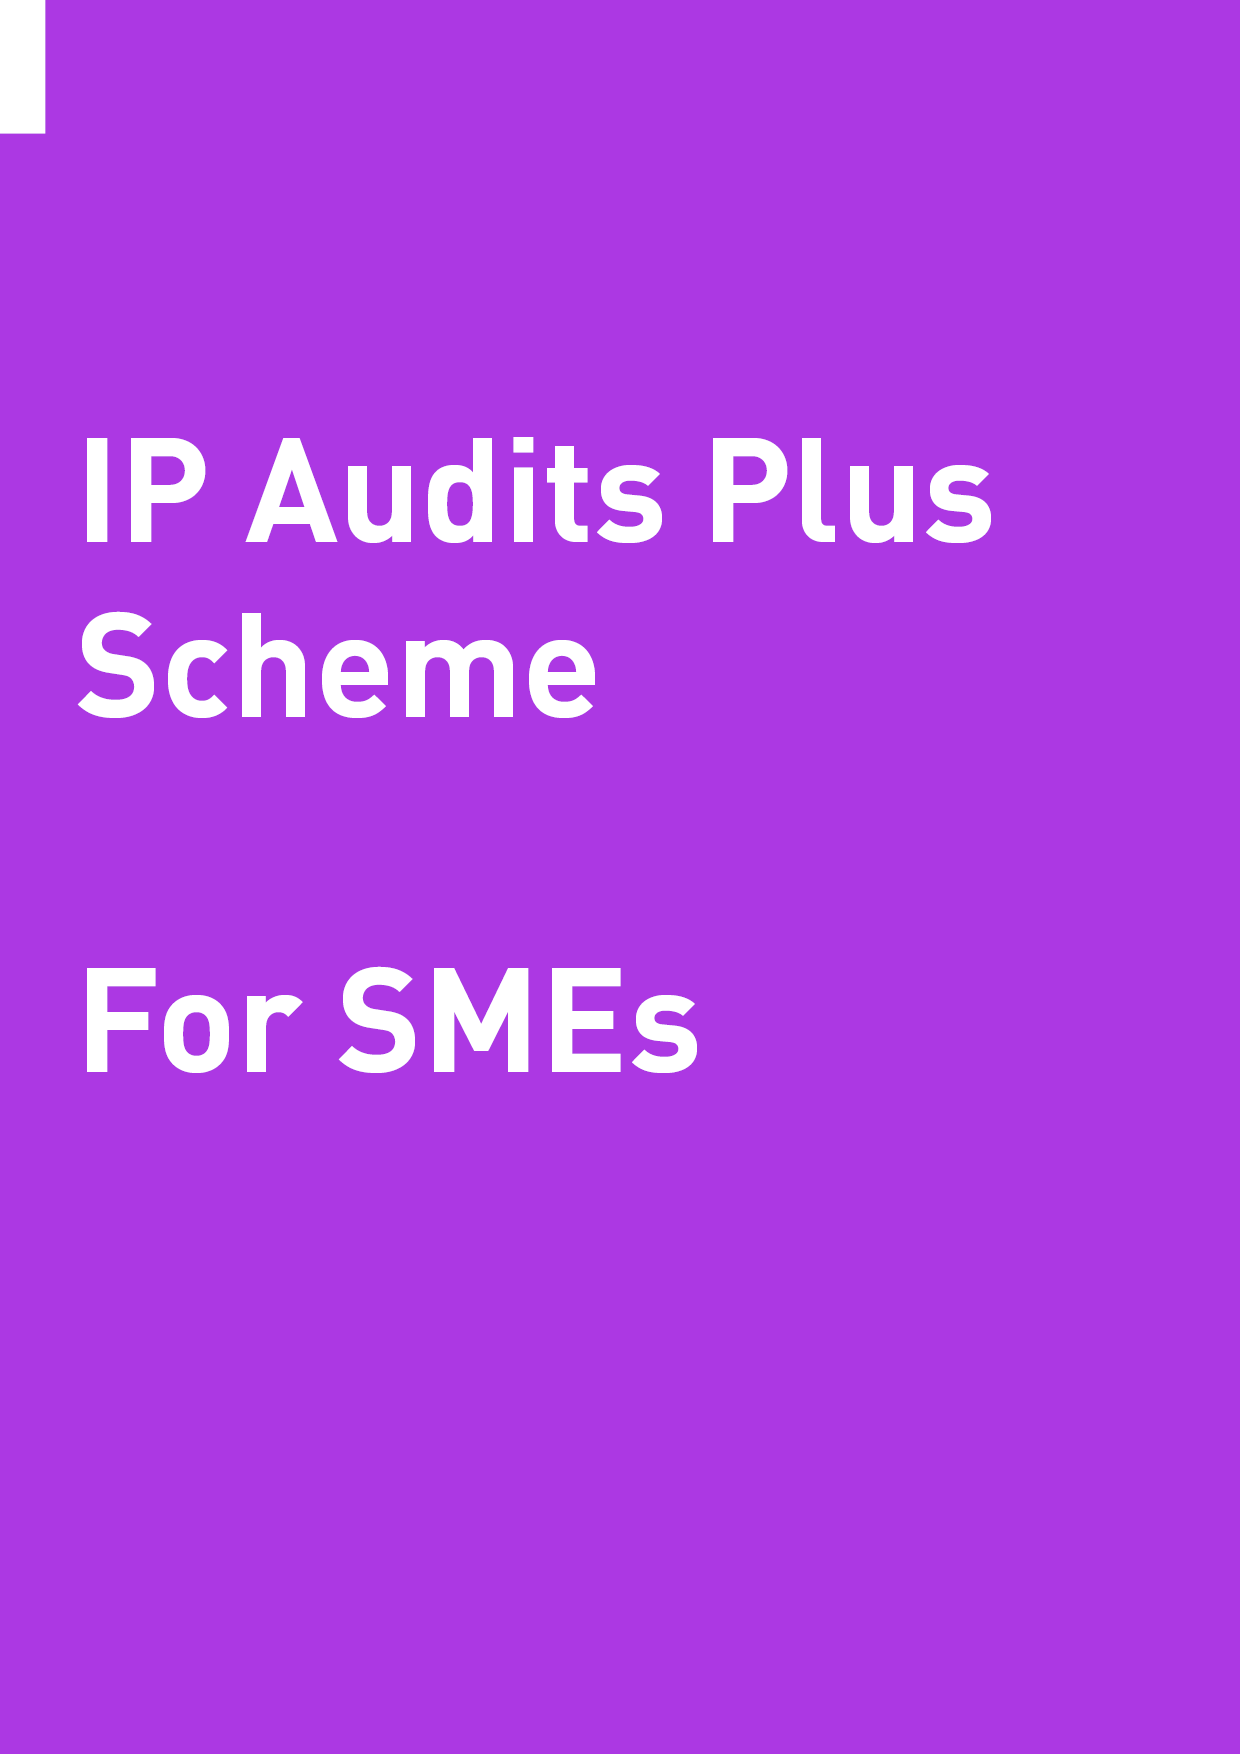 What SMEs Should Know About The IP Audits Plus Scheme